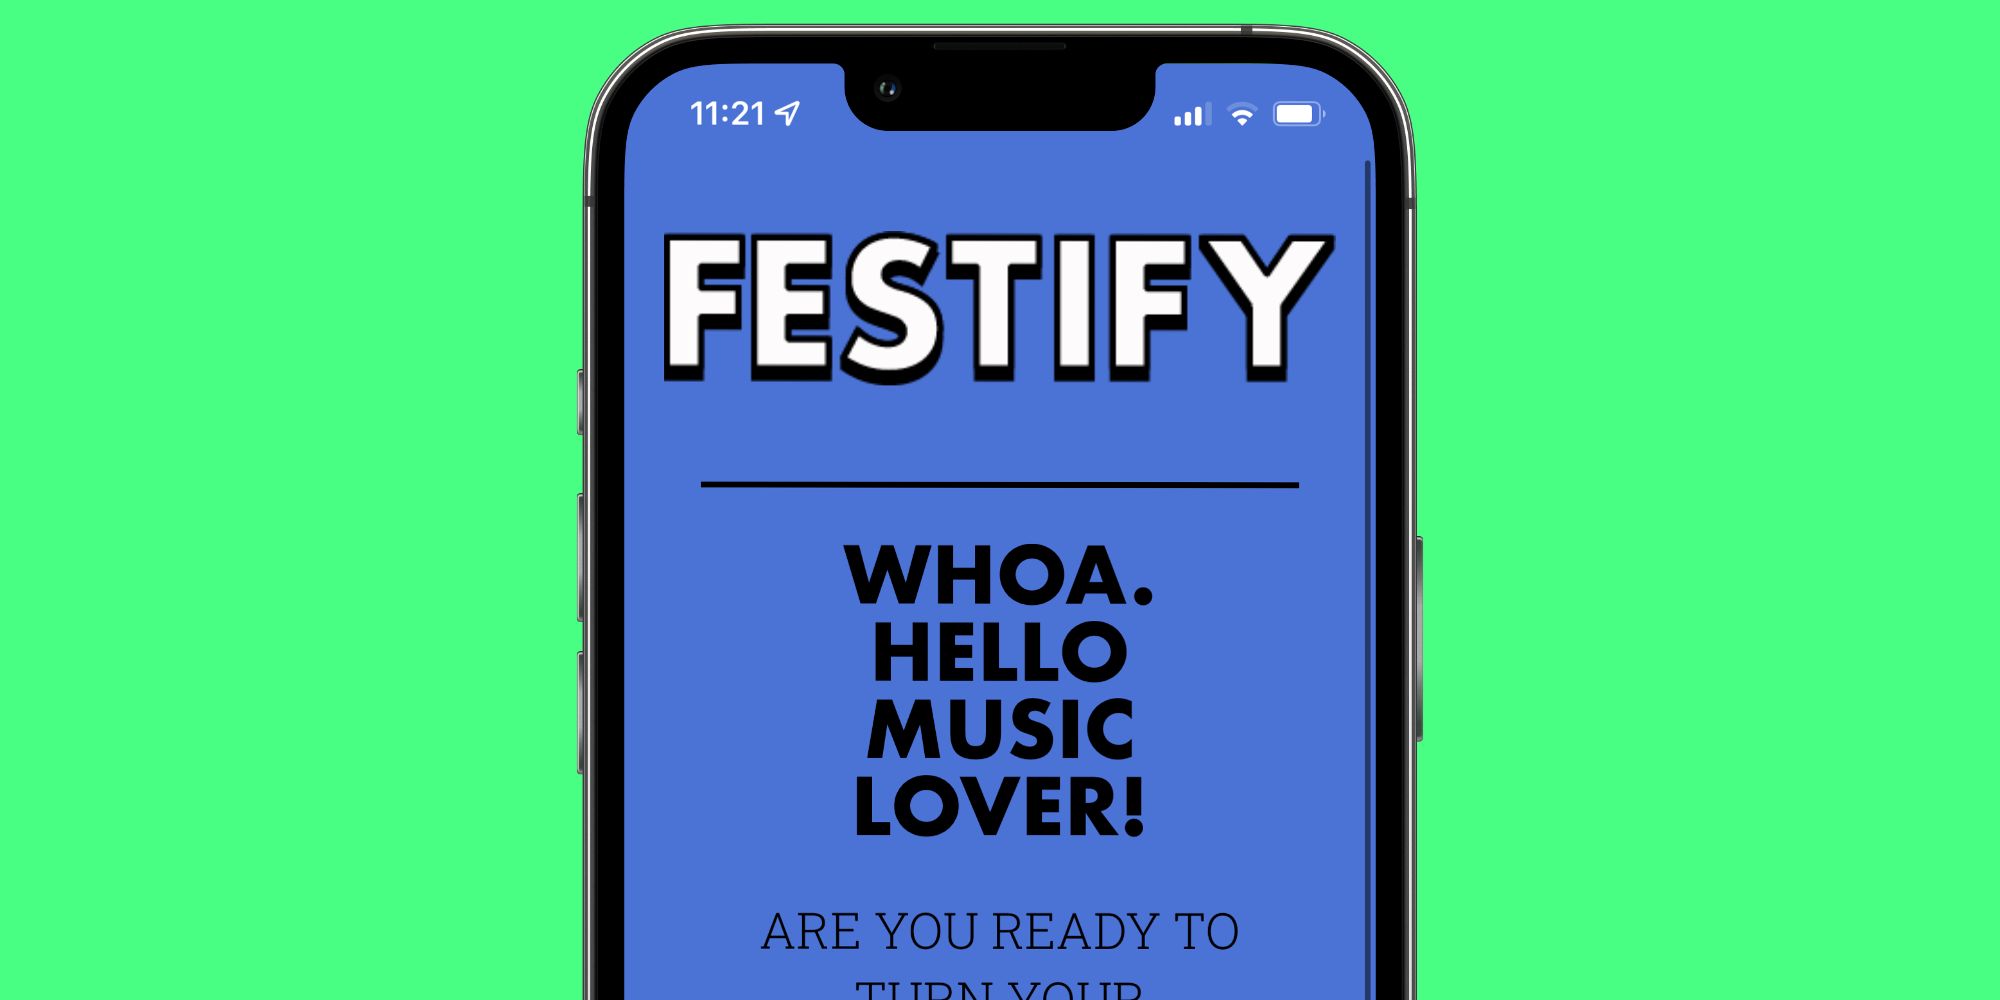 Festify For Spotify: How To Turn Your Music Into A Festival Lineup